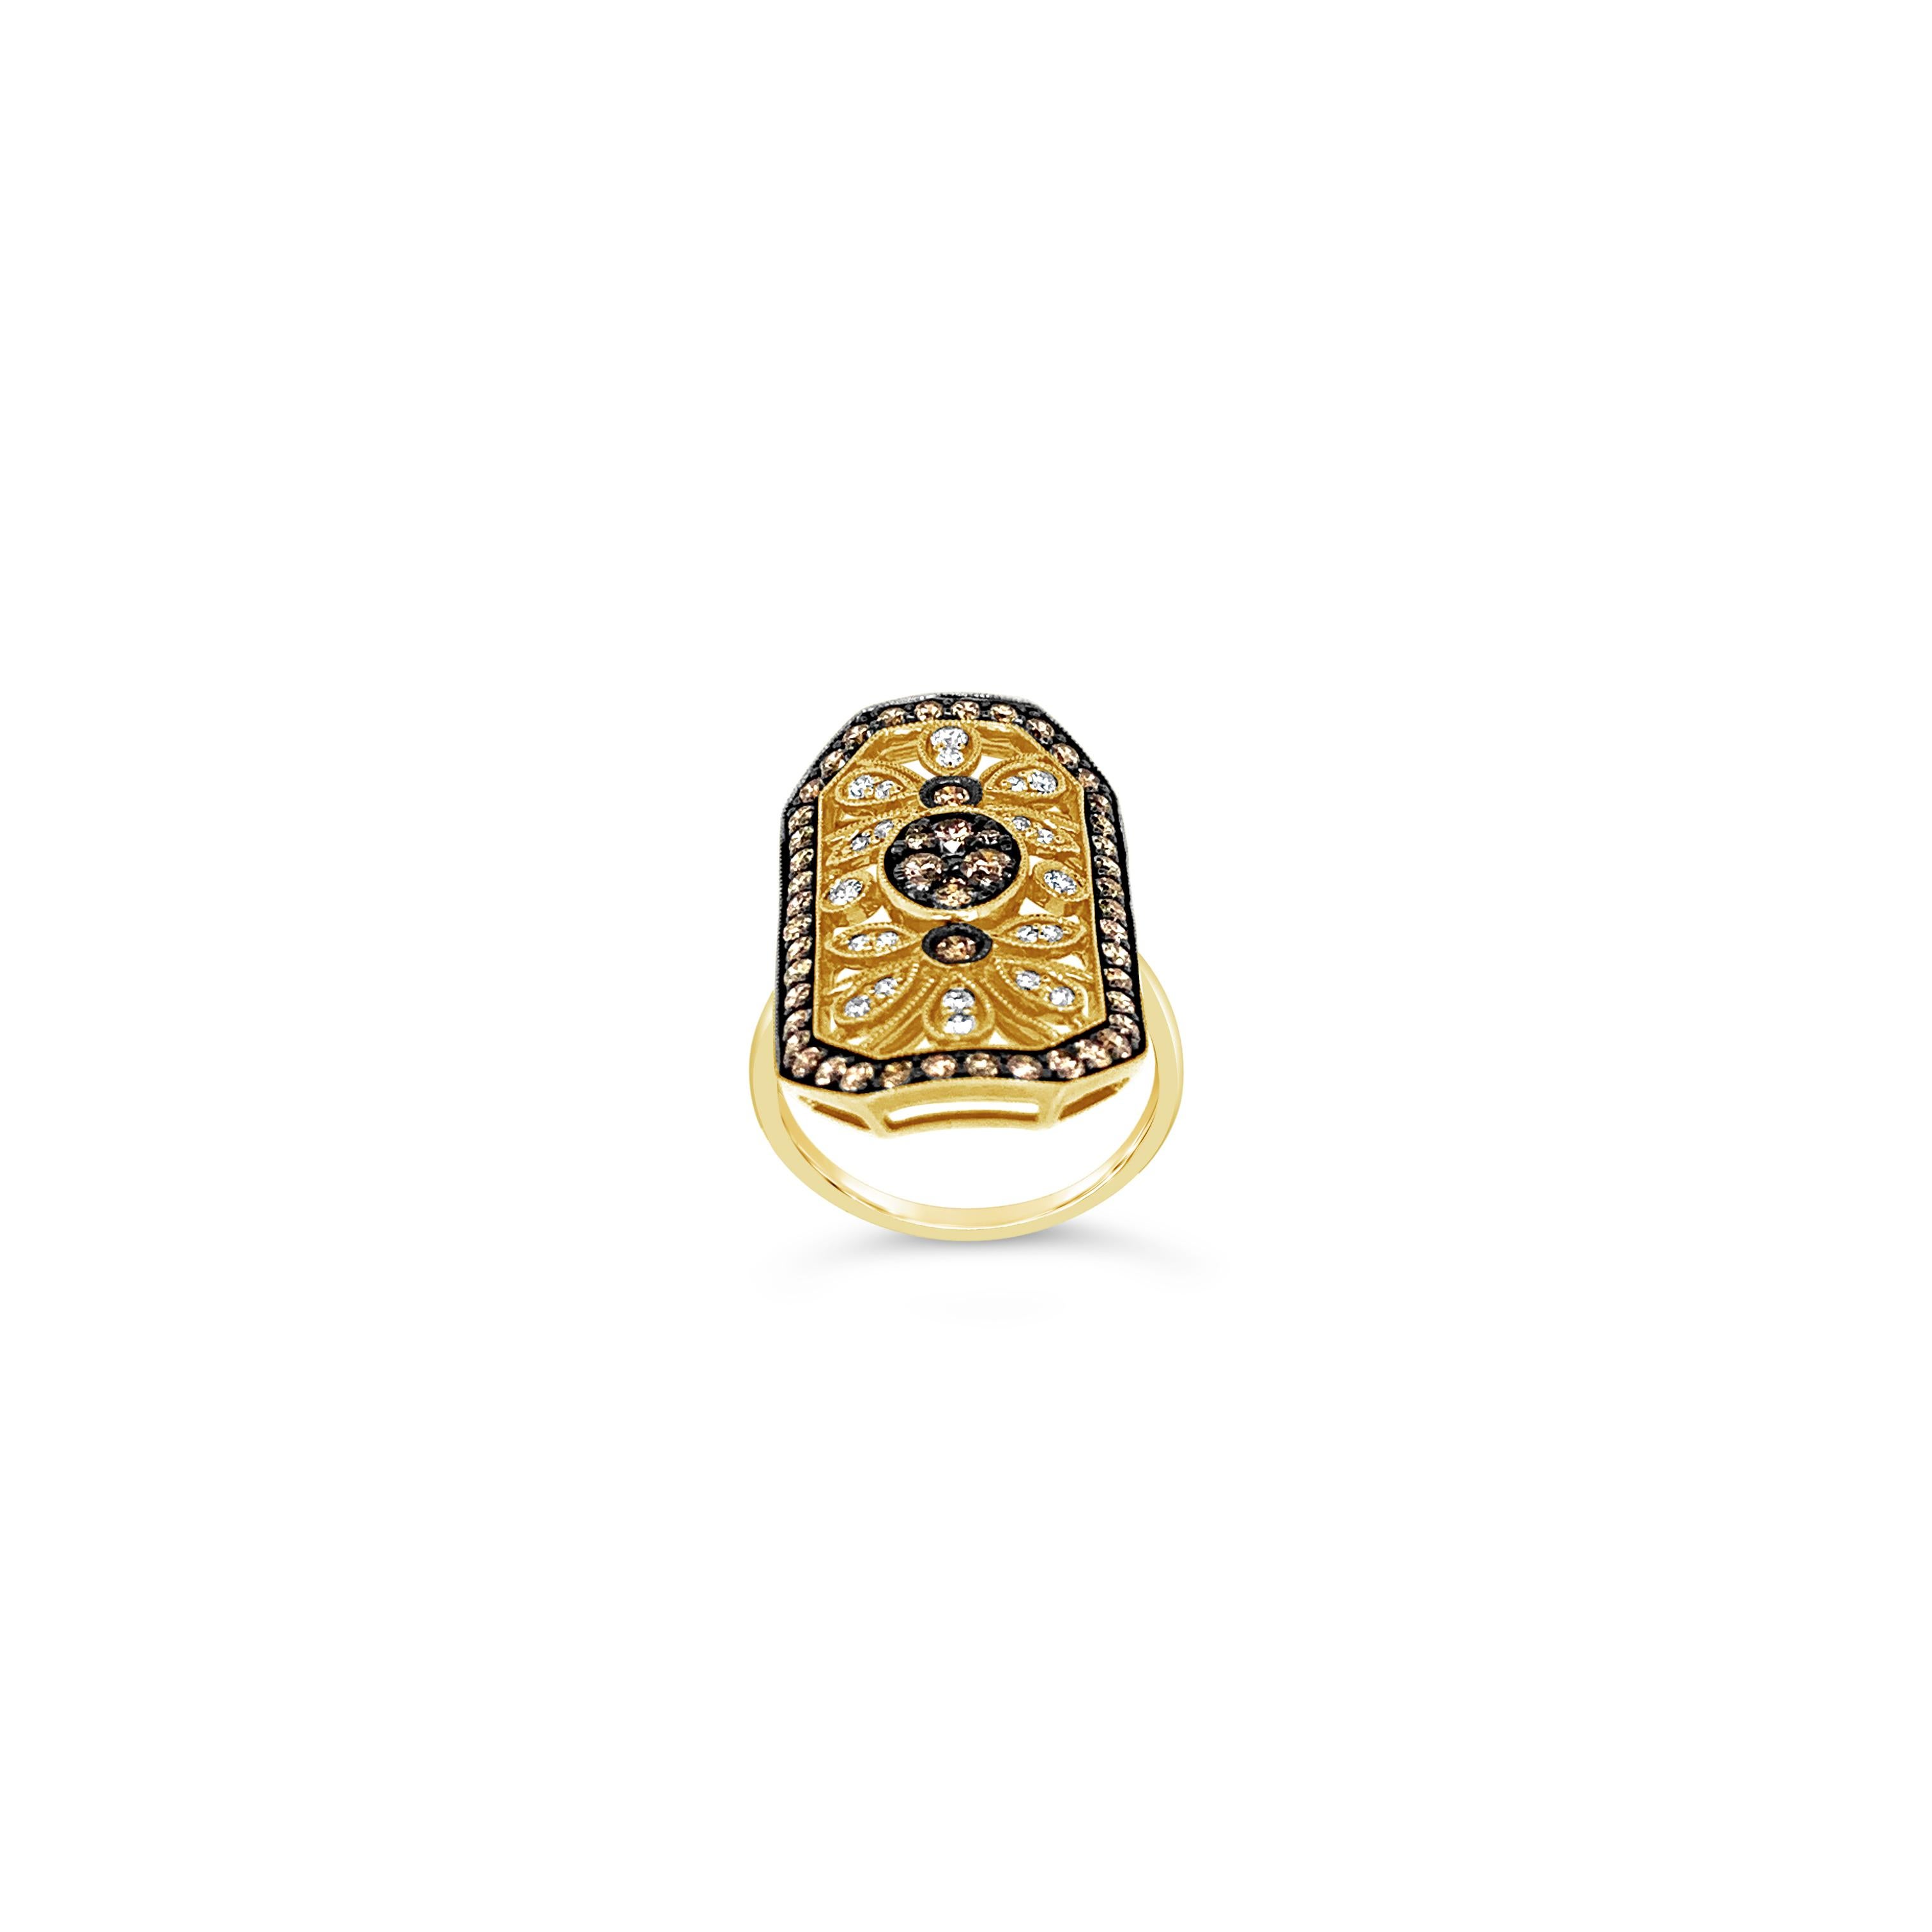 Le Vian Chocolatier® Ring featuring 1.19 cts. Chocolate Diamonds®, .28 cts. Vanilla Diamonds® set in 14K Honey Gold™

Diamonds Breakdown:
1.19 cts Brown Diamonds
.28 cts White Diamonds

Gems Breakdown:
None

Ring may or may not be sizable, please